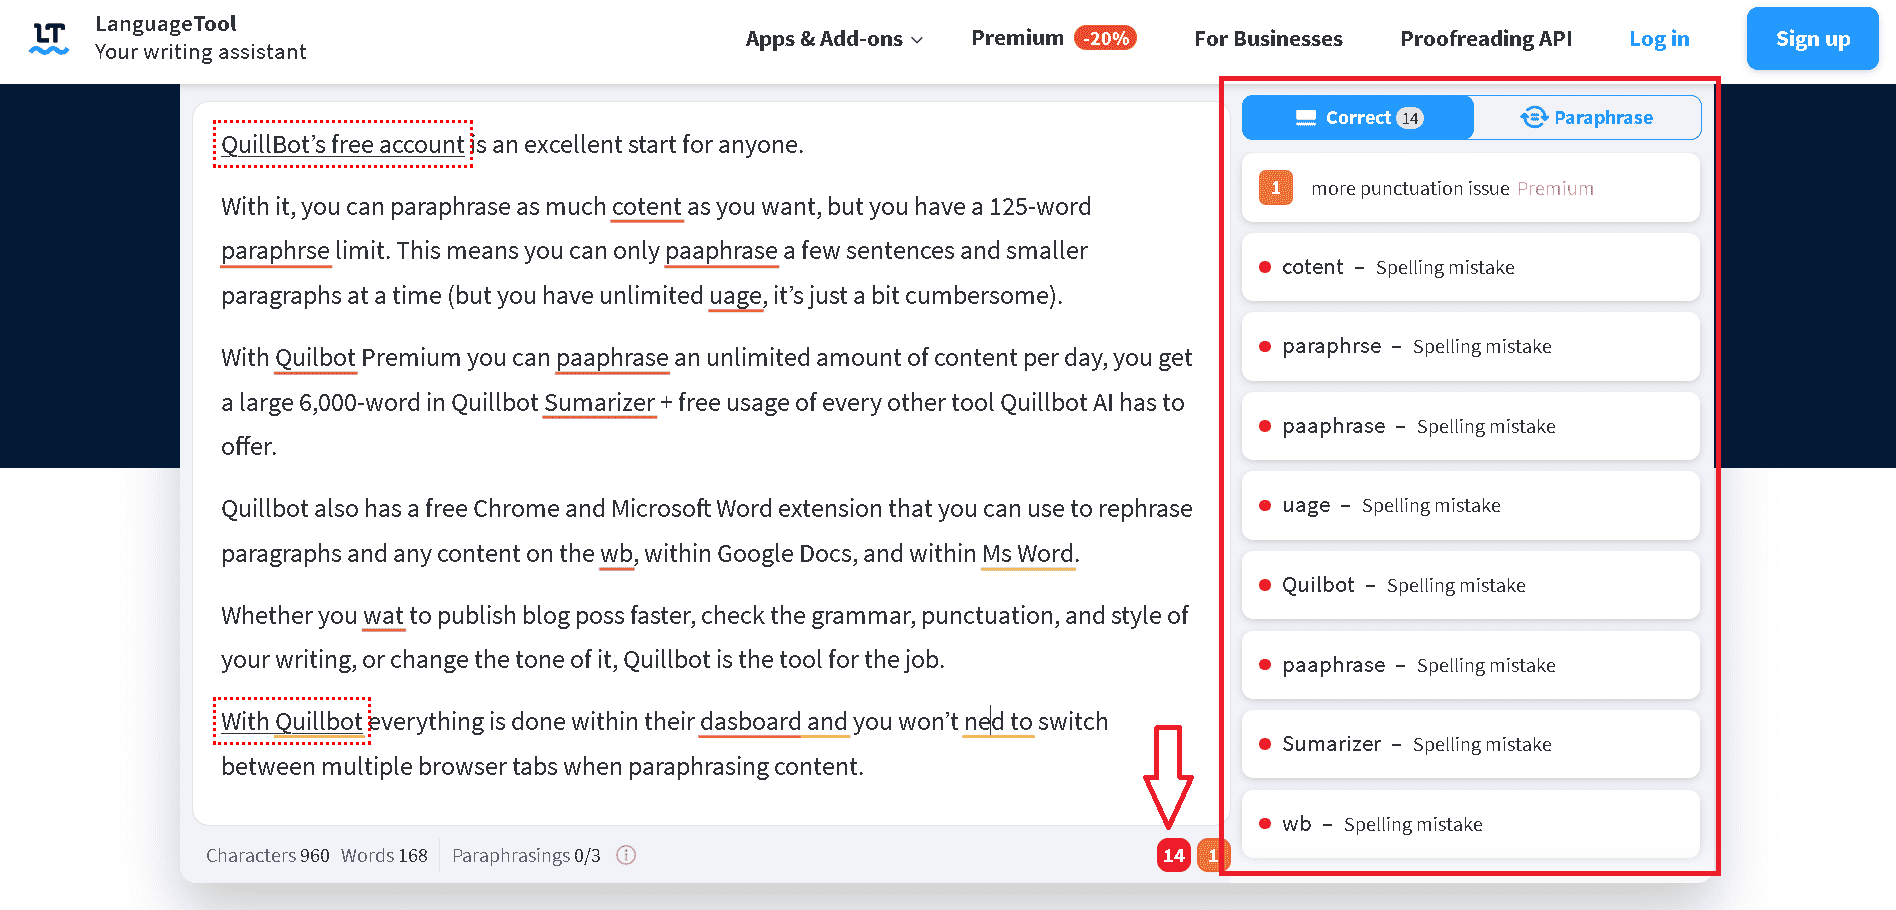 LanguageTool found many grammar and spelling mistakes in my test text